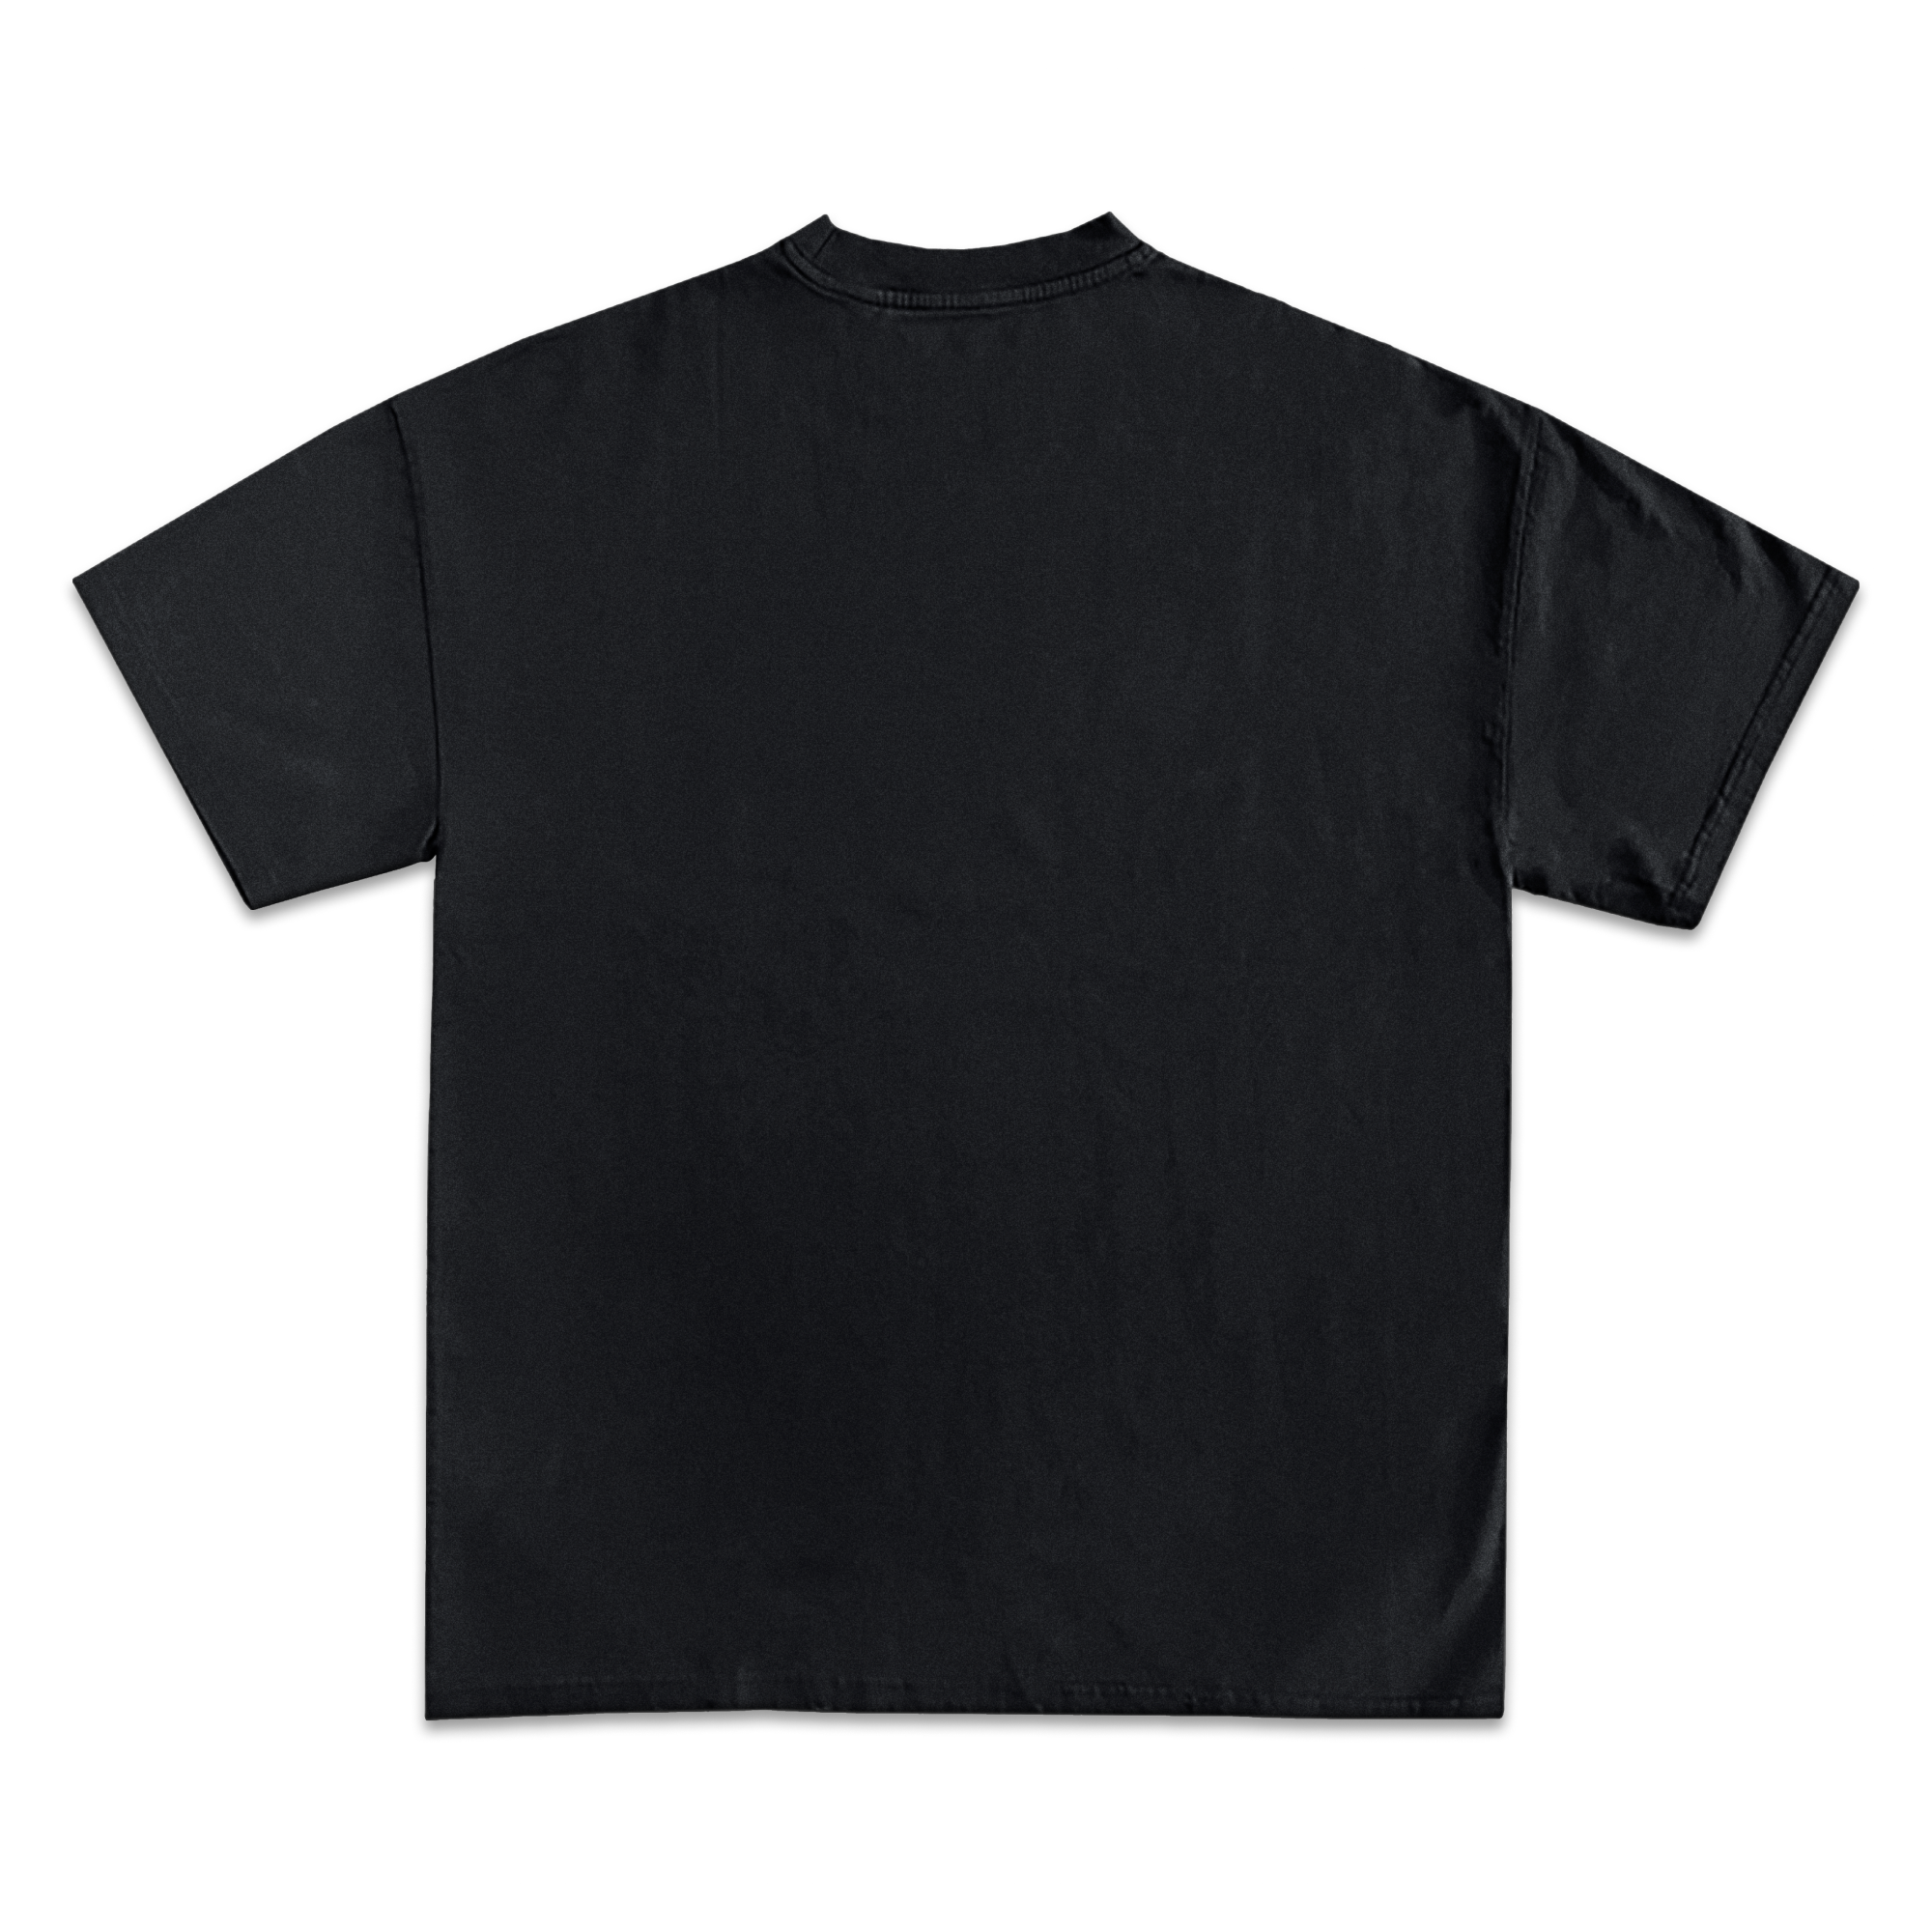 Jay-Z Graphic T-Shirt